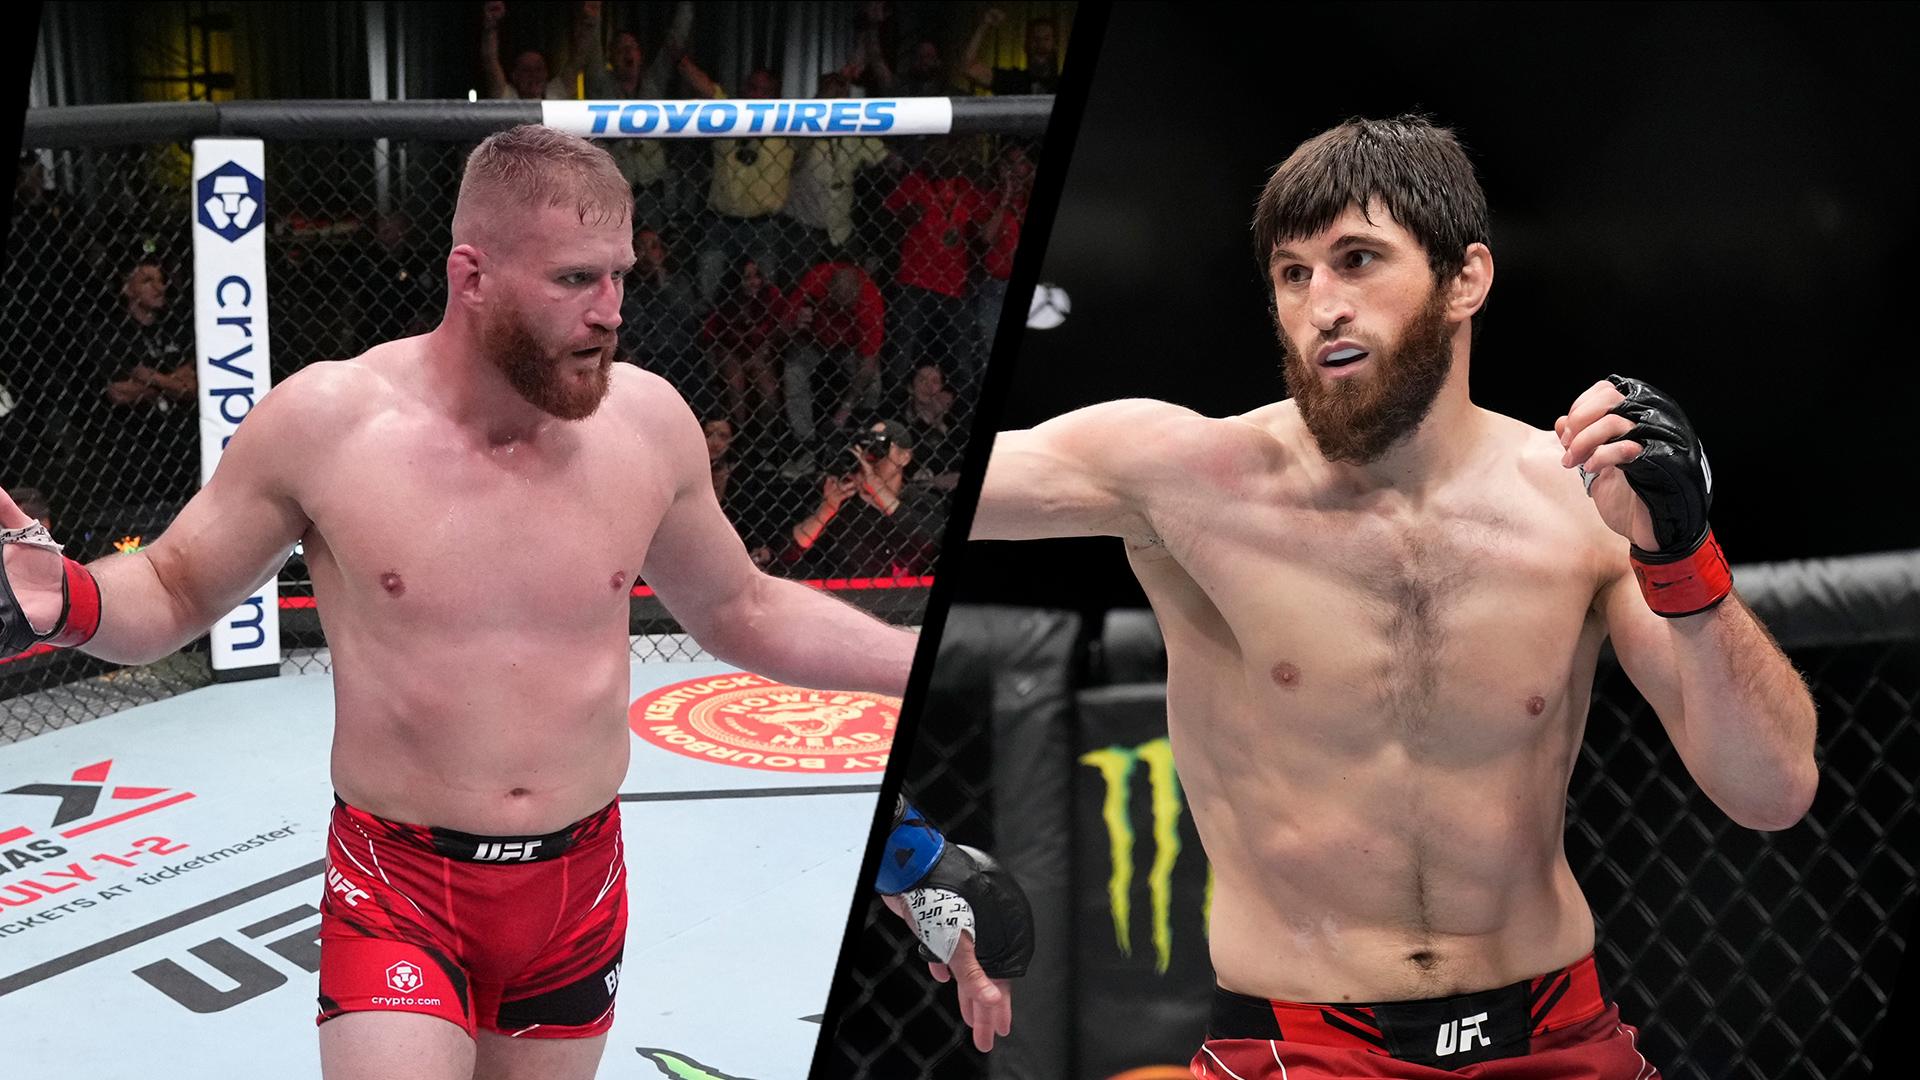 UFC 282: Blachowicz v Ankalaev Main Event Preview and Prediction